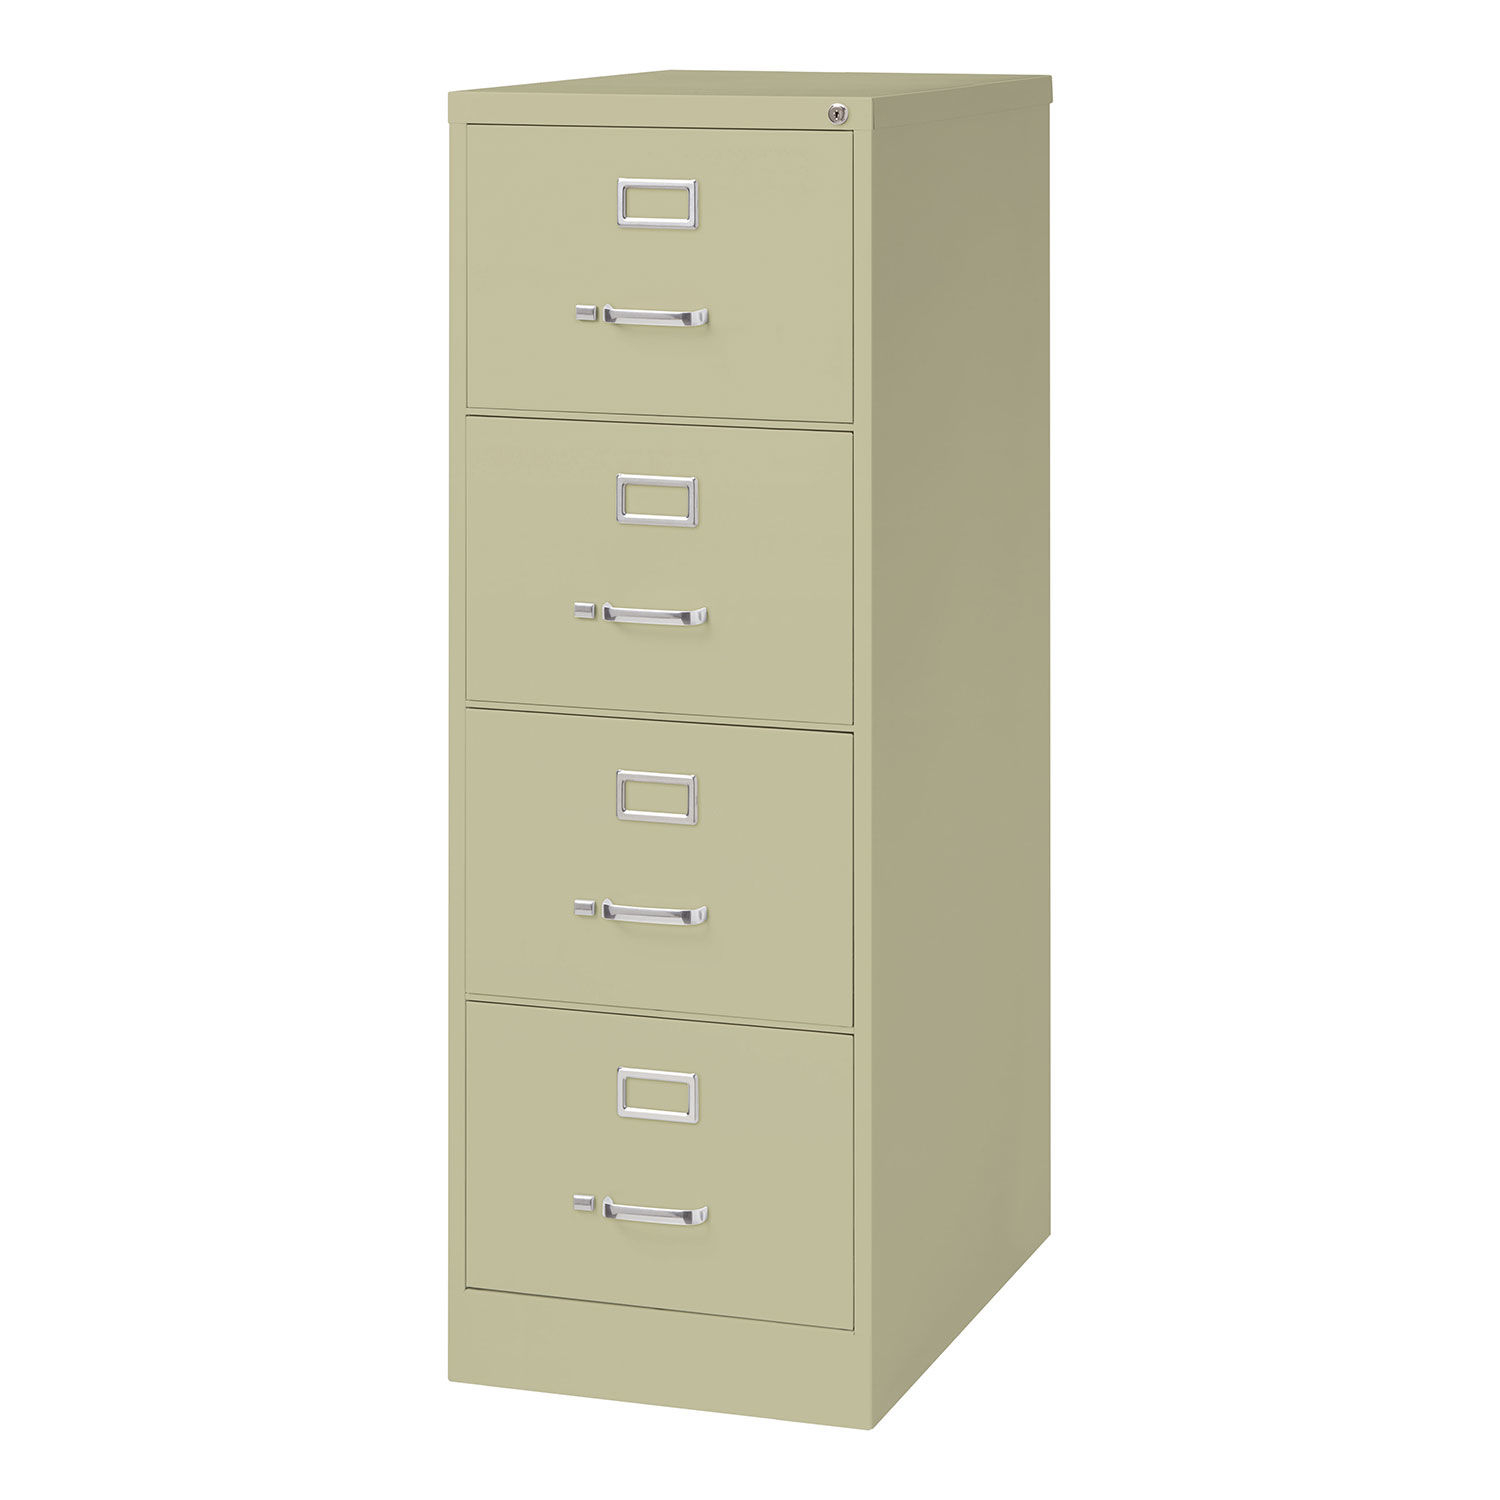 Details About Hirsh Industries 26 12 Deep Vertical File Cabinet 4 Drawer Legal Size Putty throughout measurements 1500 X 1500